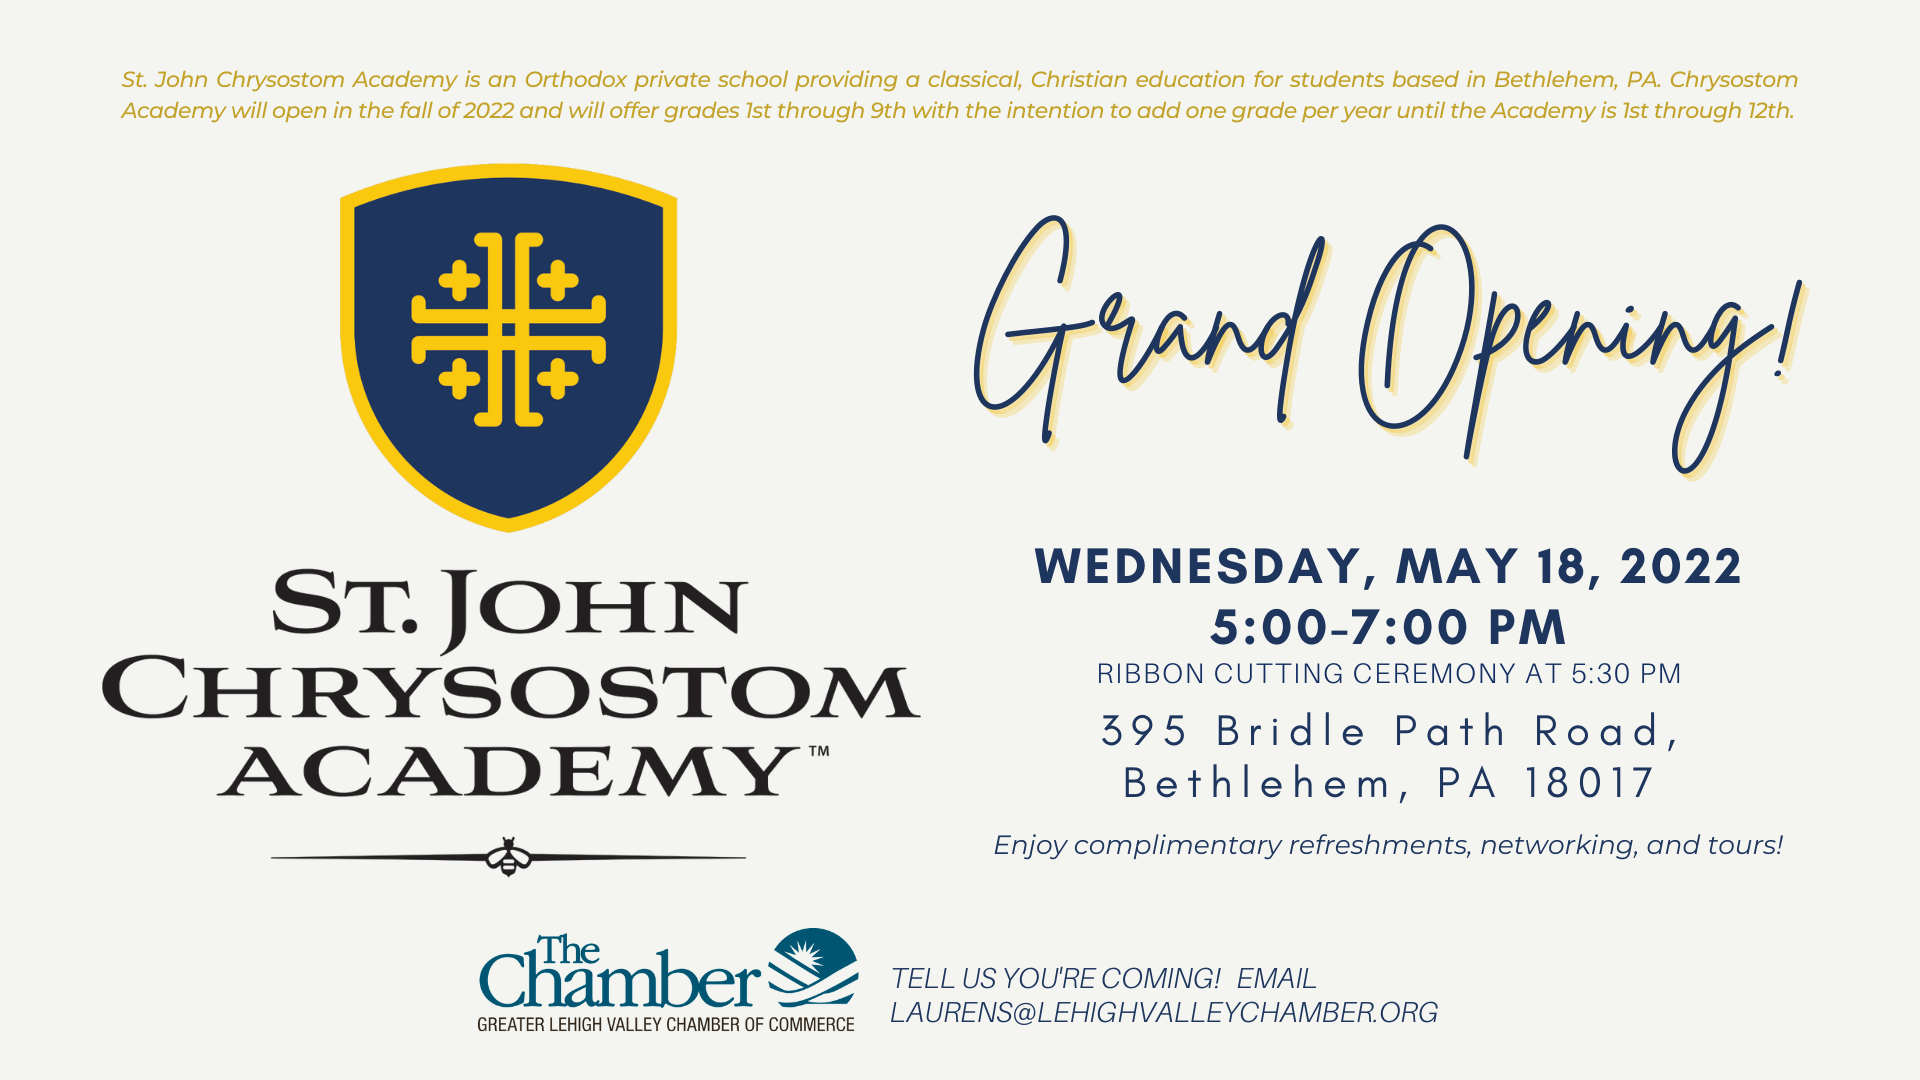 We Invite You To Join Us In Our Grand Opening!